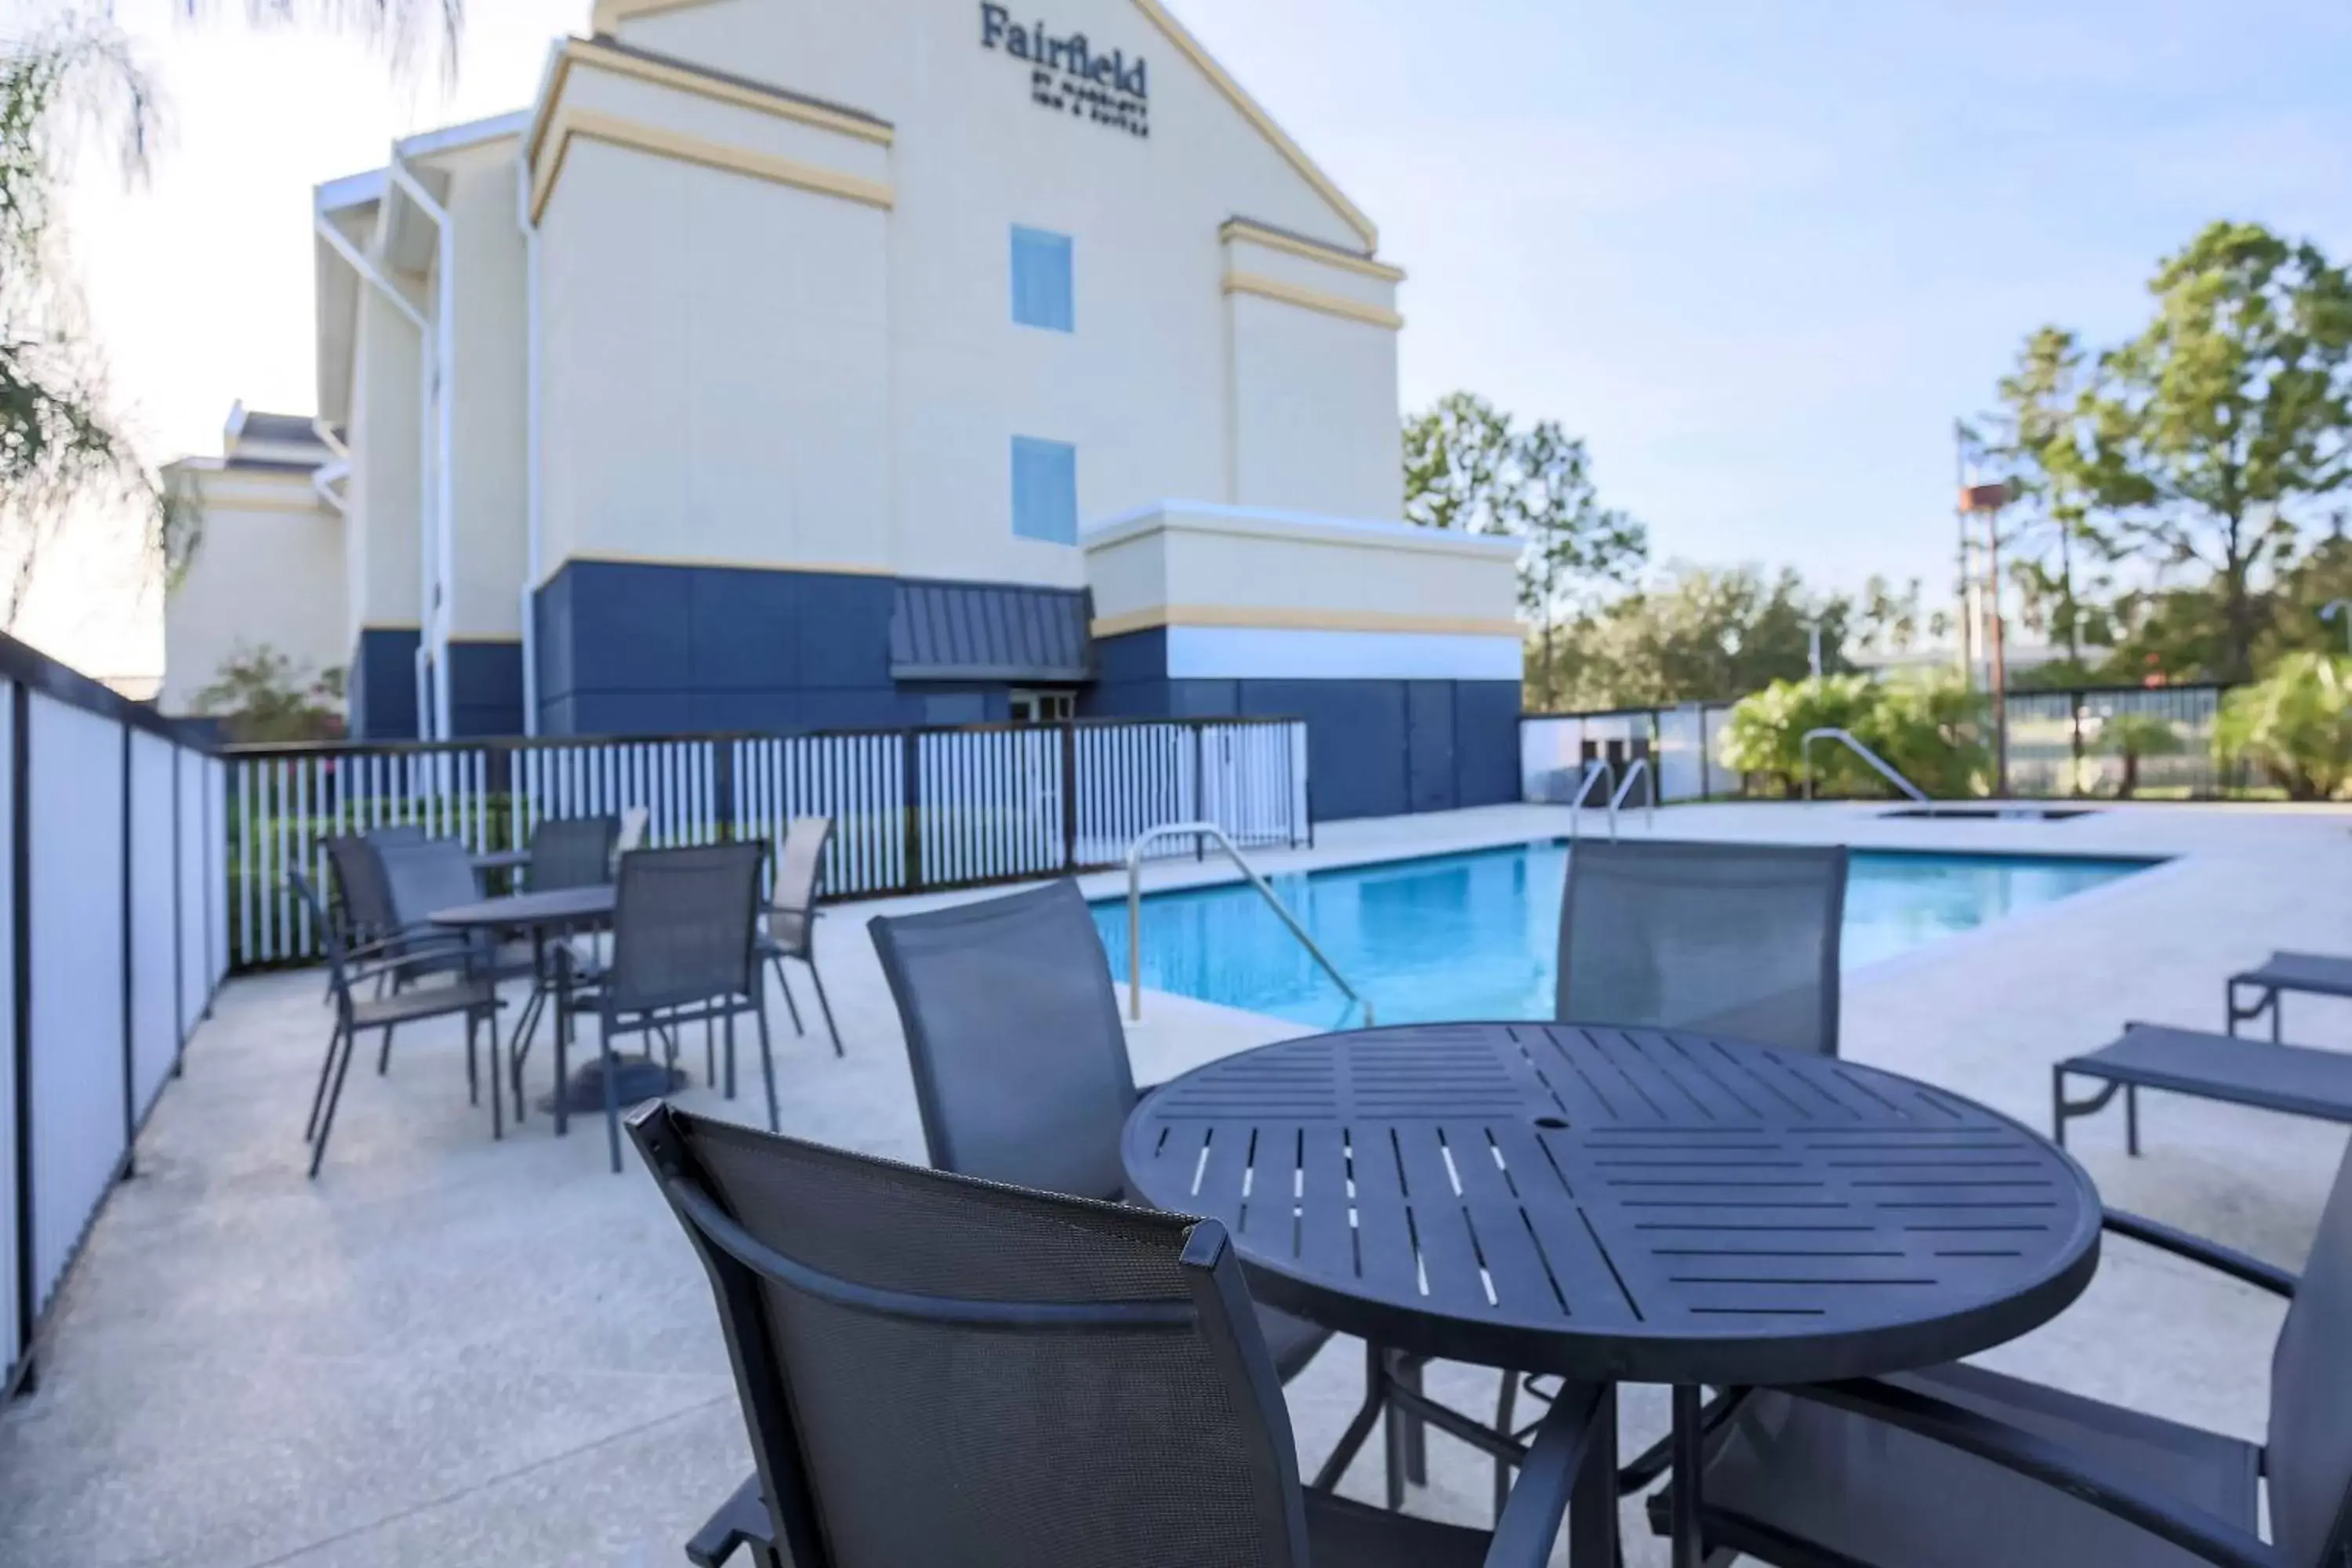 Fitness centre/facilities, Swimming Pool in Fairfield Inn & Suites Tampa Fairgrounds/Casino